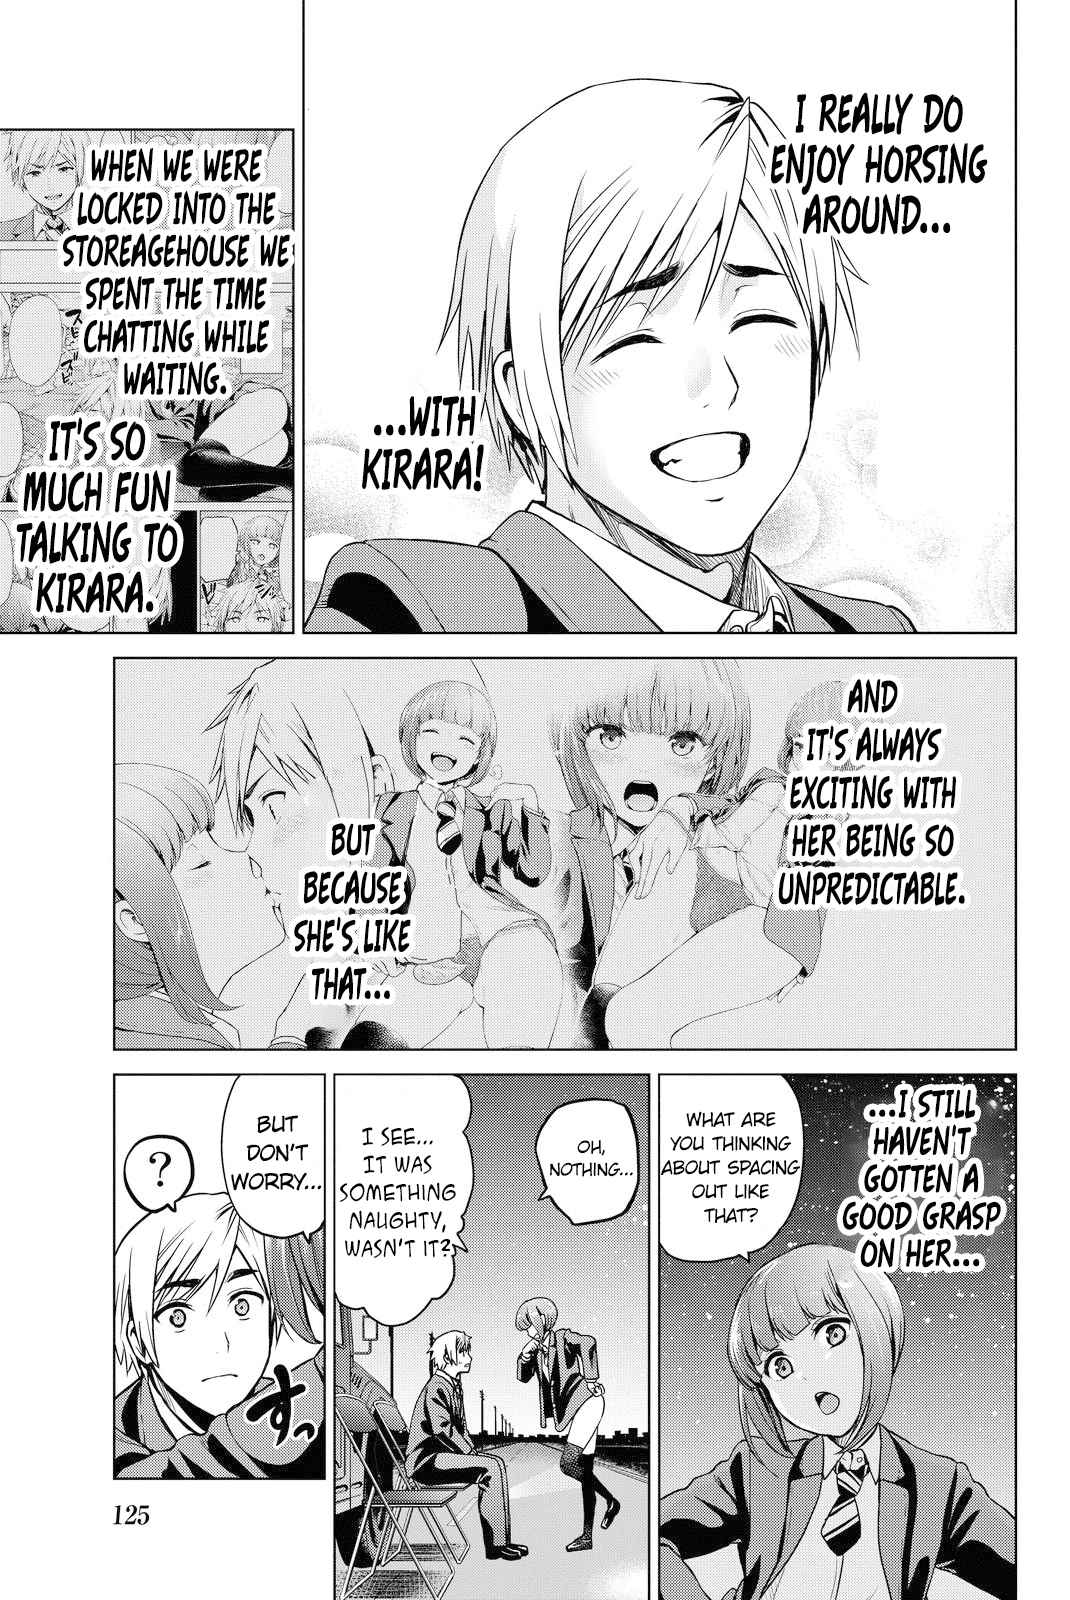 INFECTION Vol. 6 Ch. 49 The meaning of "like"